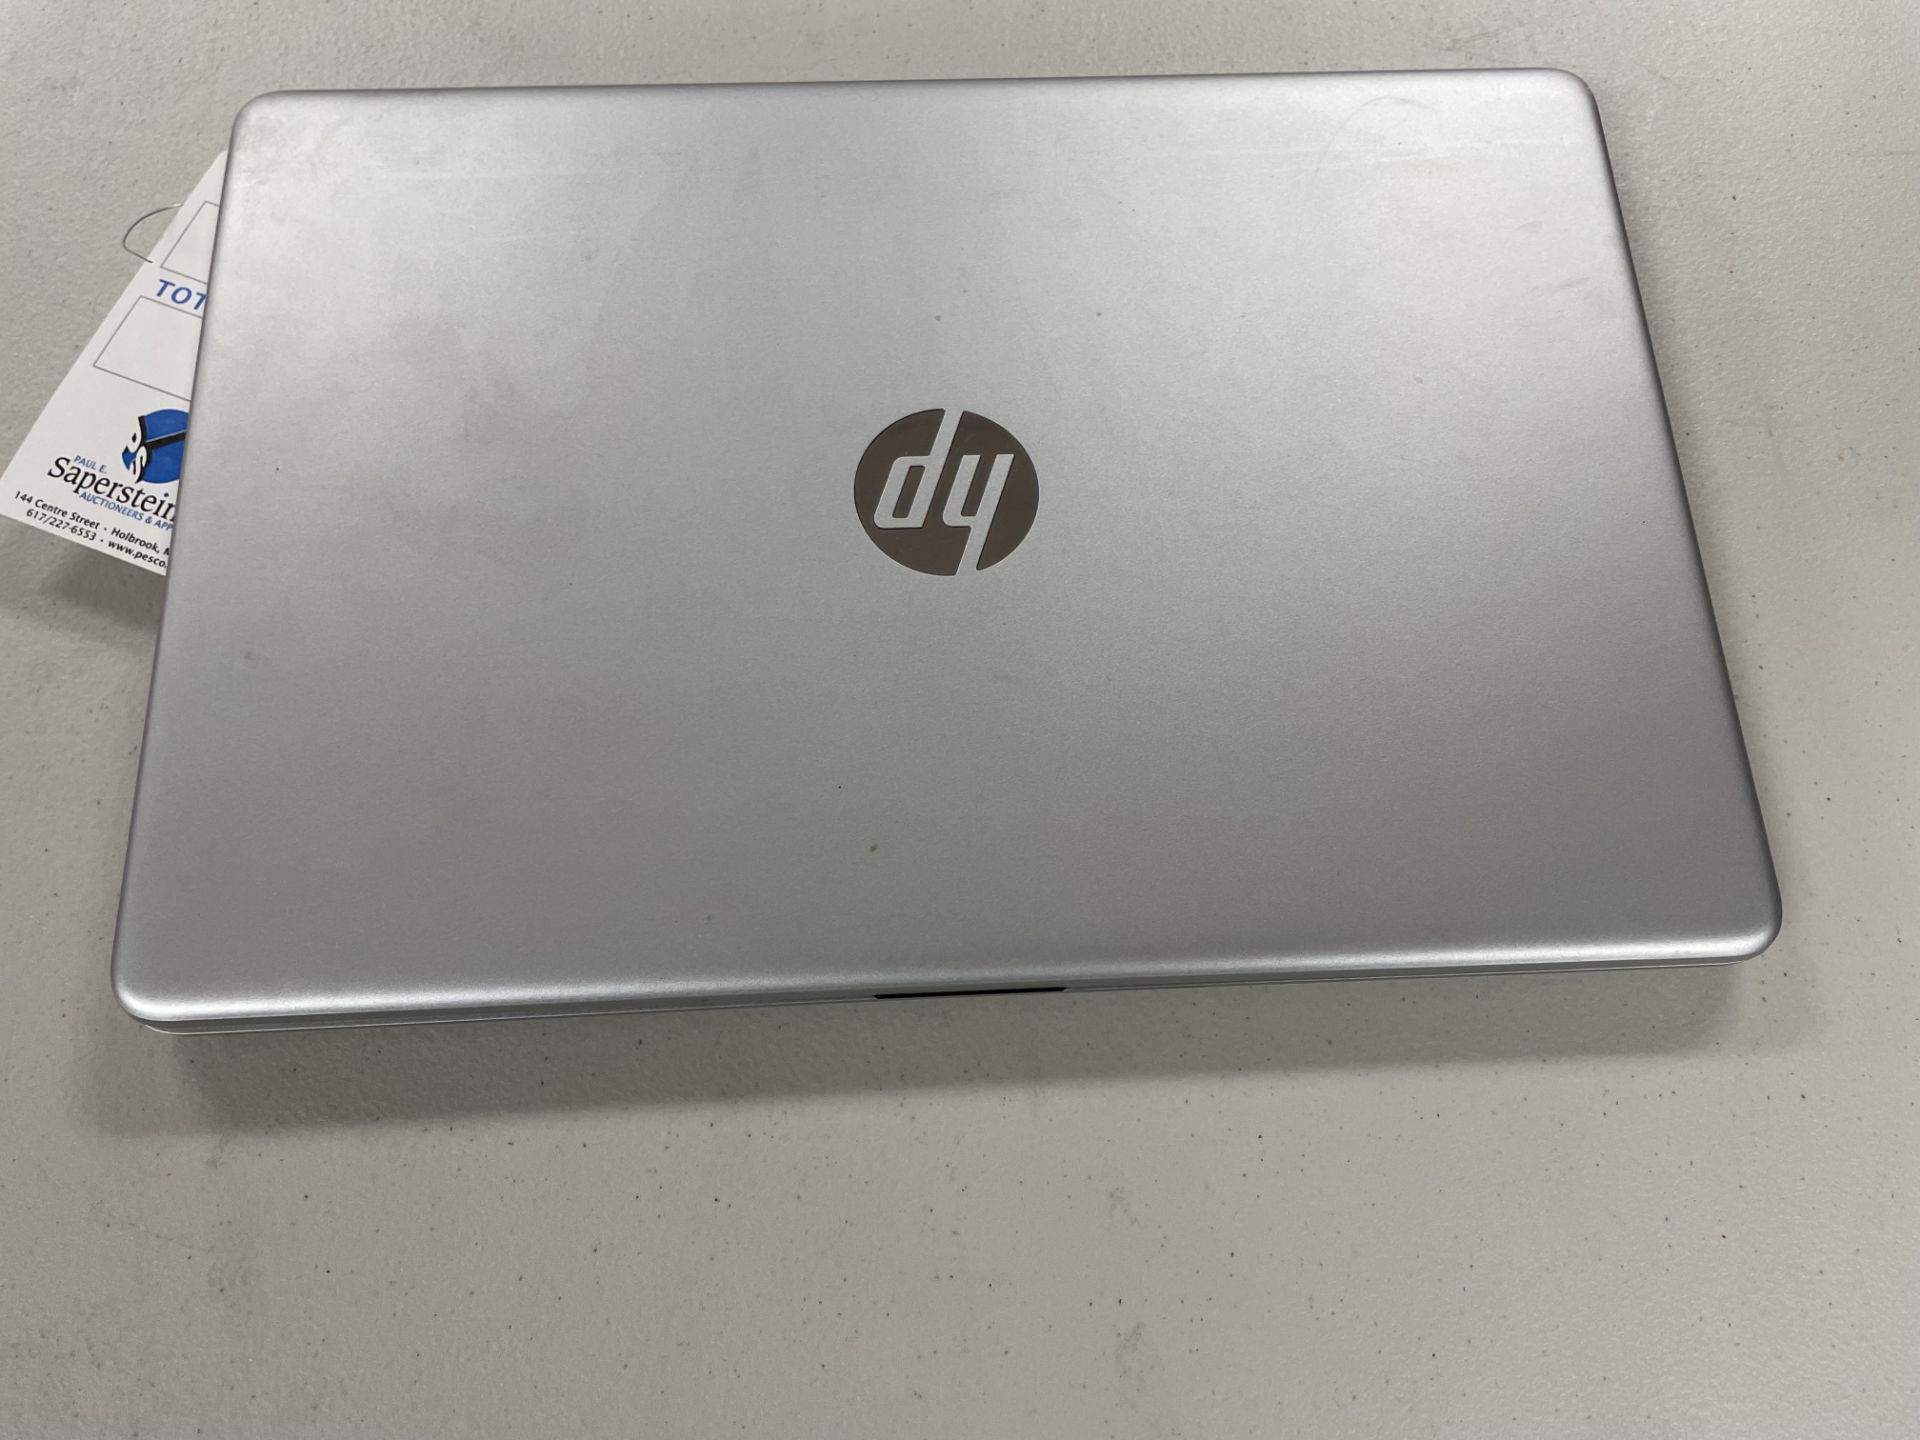 HP Core i5 Model 15-DY1059MS Laptop w/ Power Supply - Image 2 of 2